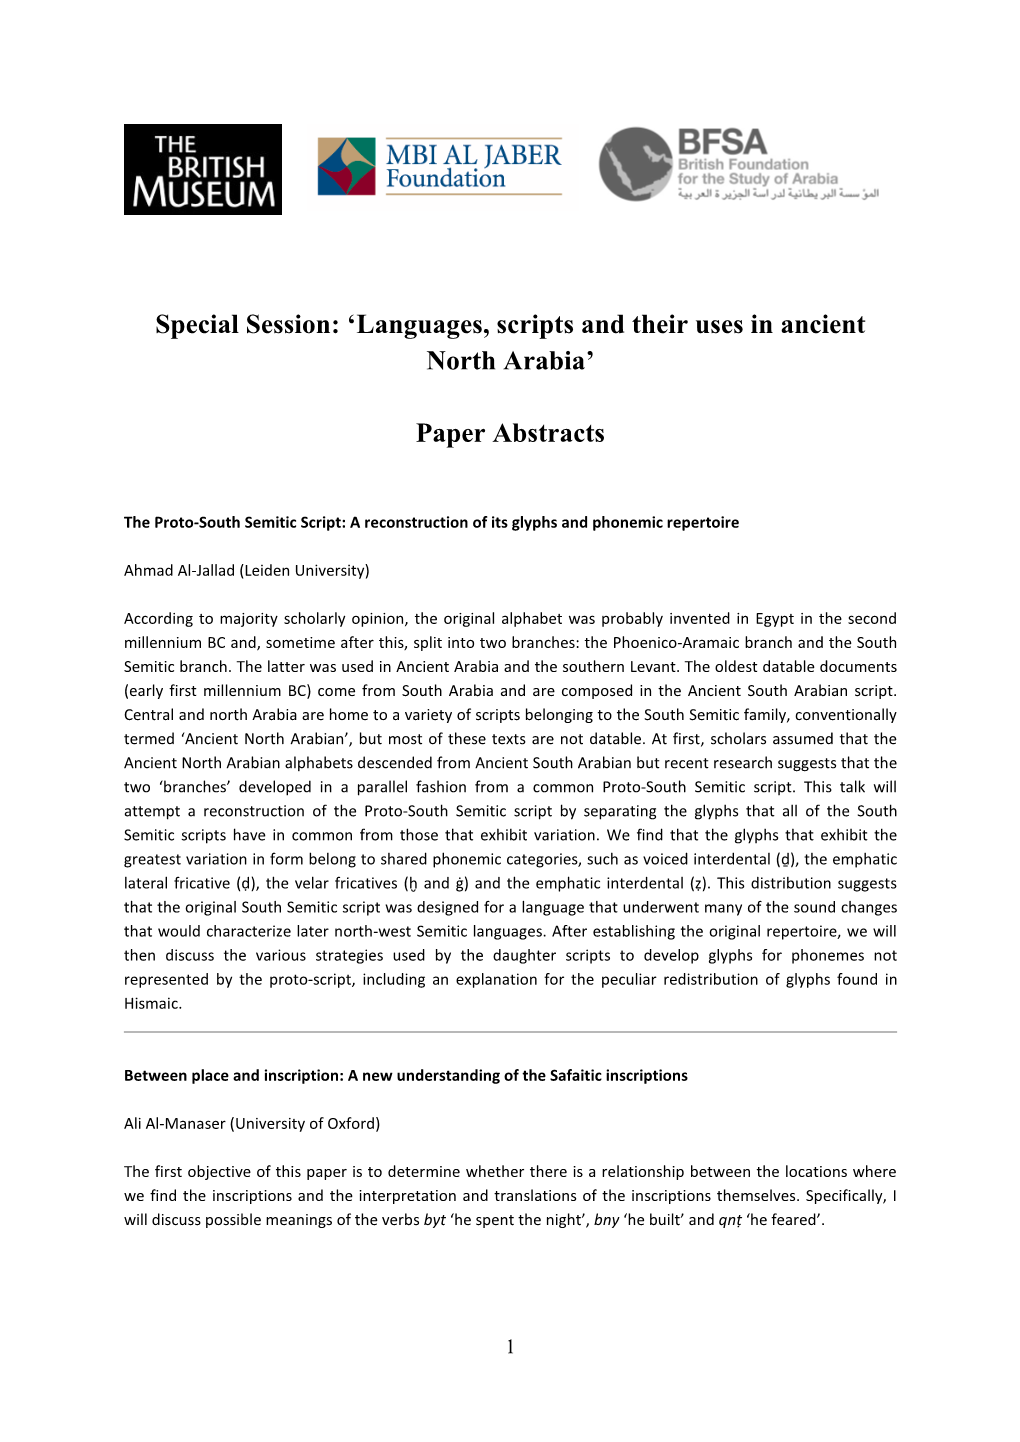 Special Session: 'Languages, Scripts and Their Uses in Ancient North